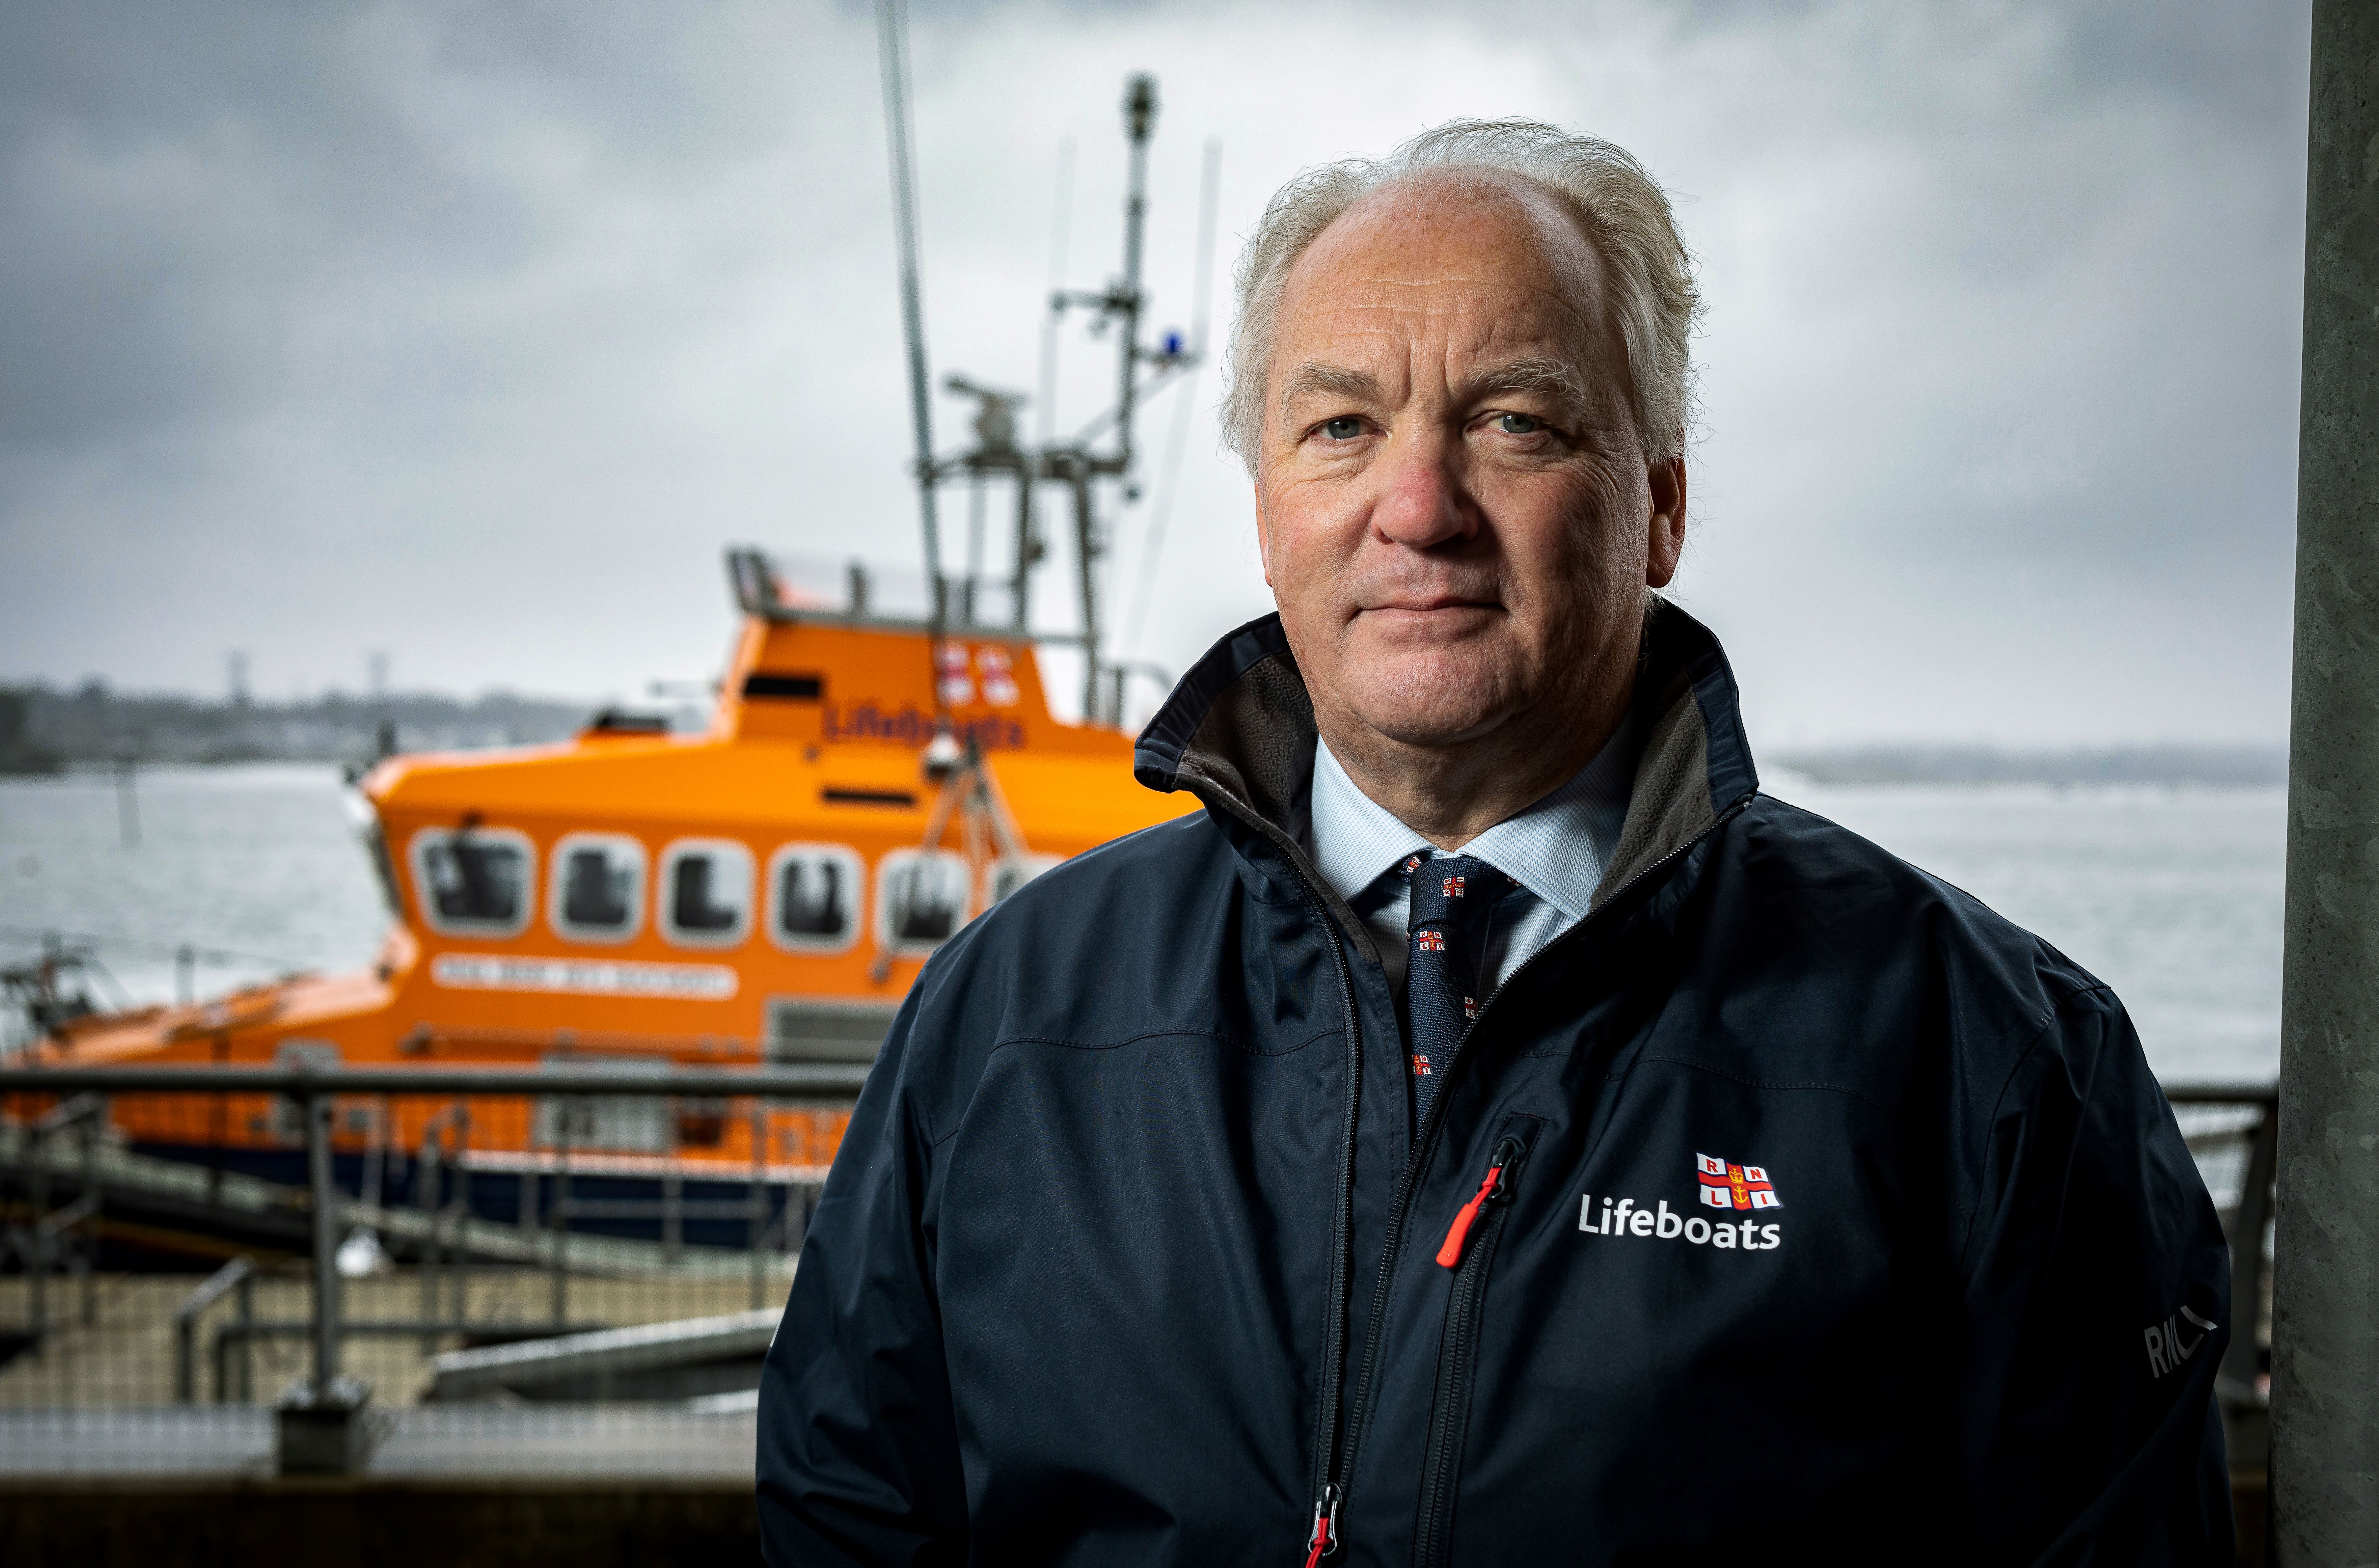 RNLI Chief Executive Mark Dowie called the abuse “unacceptable”